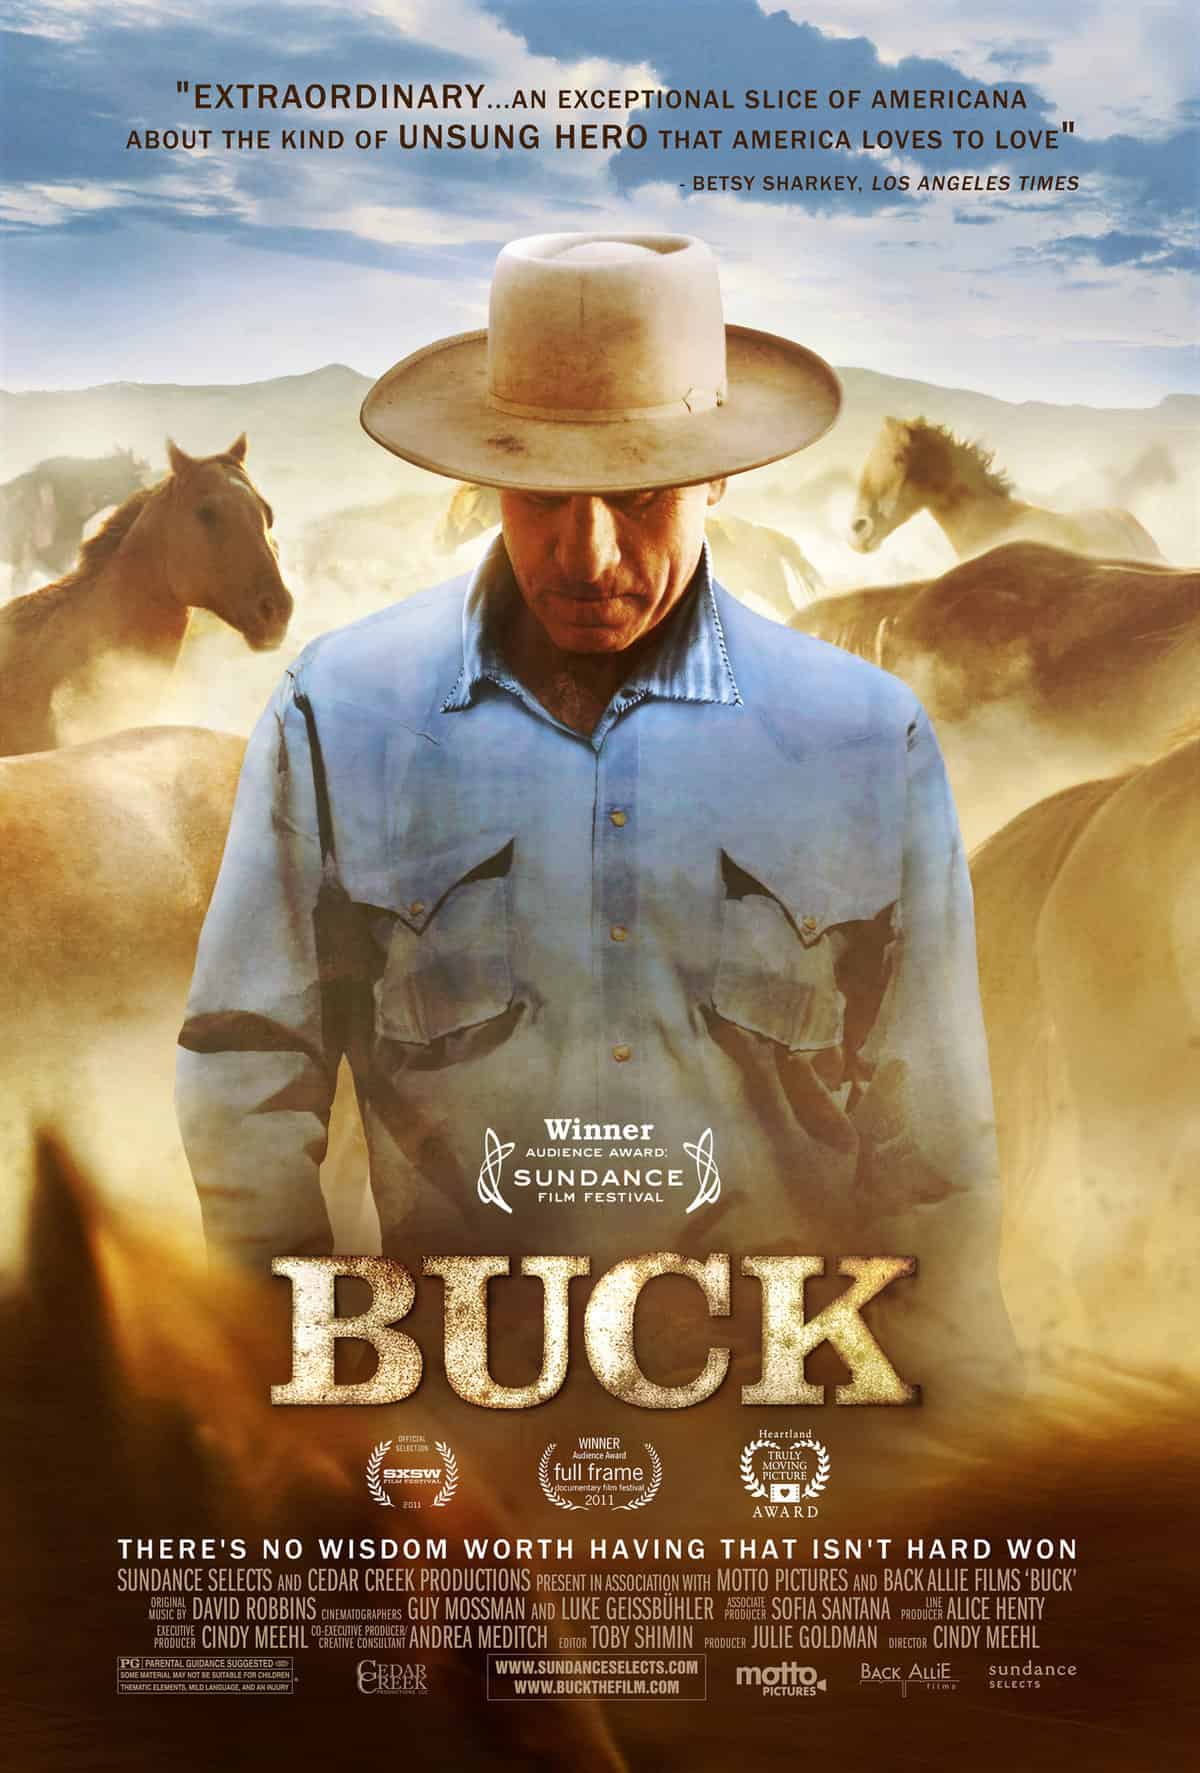 25 Best Horse Movies You Should Totally Watch – Buck